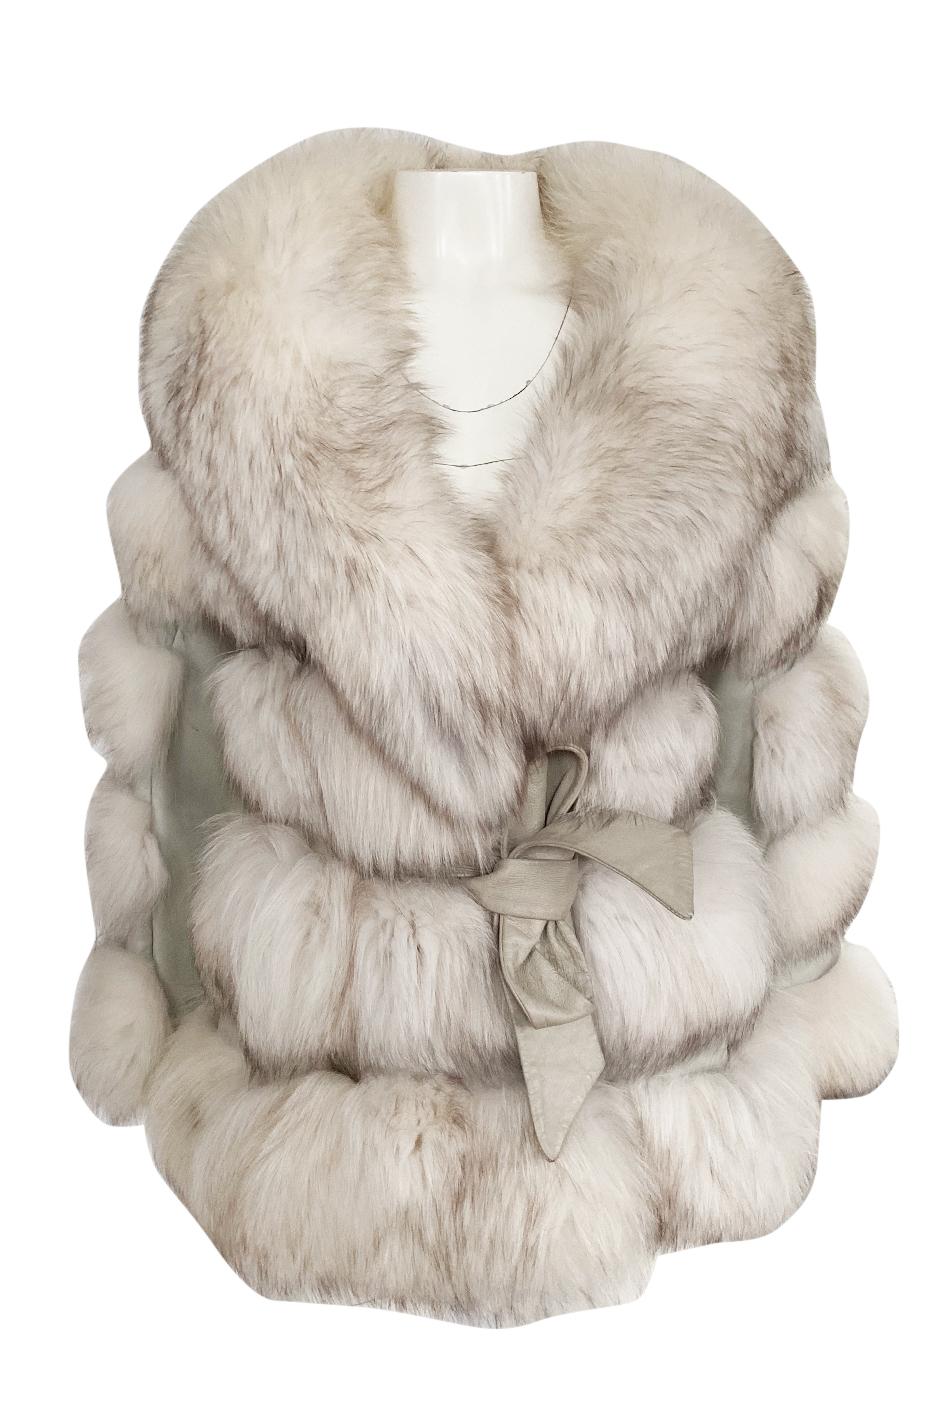 This is an incredible fur and the workmanship is of the best possible quality. Schiaparelli is of course celebrated for her bold designs and elements of wit and the unexpected. The furs being produced under the Schiaparelli name during this time